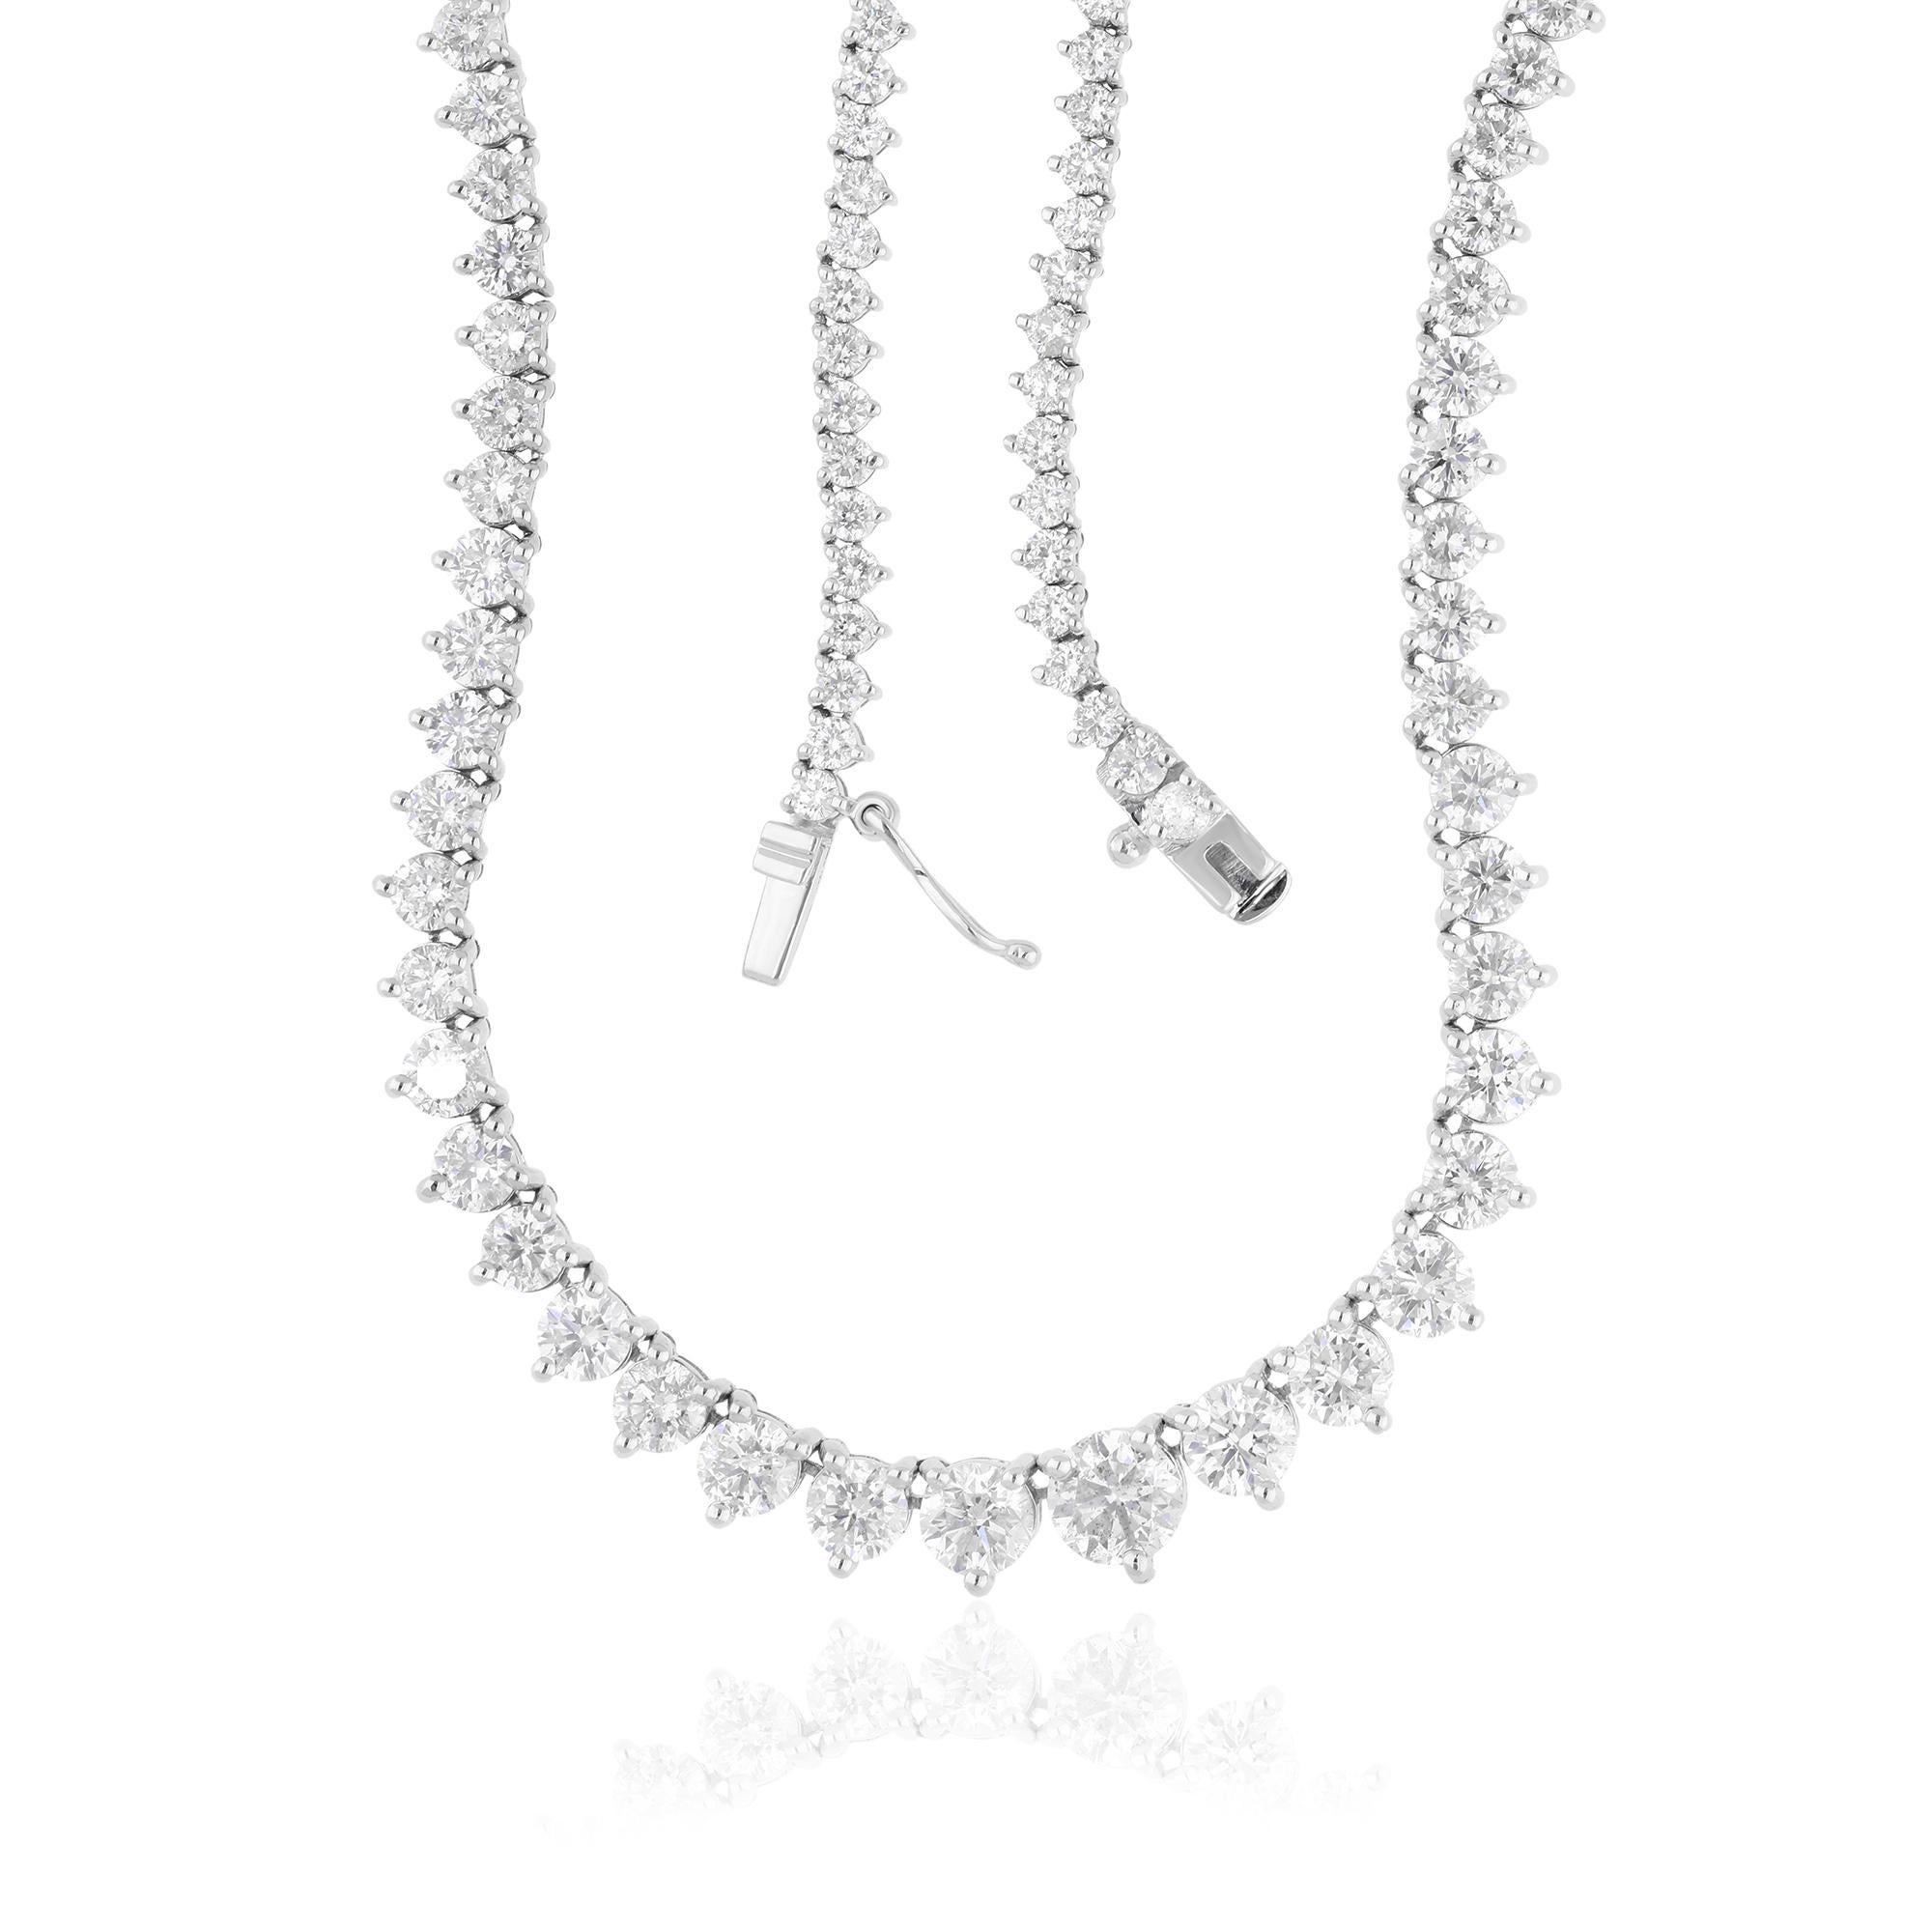 At the heart of the necklace is a dazzling array of natural diamonds, each carefully selected for its exceptional quality, brilliance, and fire. From radiant rounds to majestic marquise cuts, the diamonds come together in a symphony of sparkle and